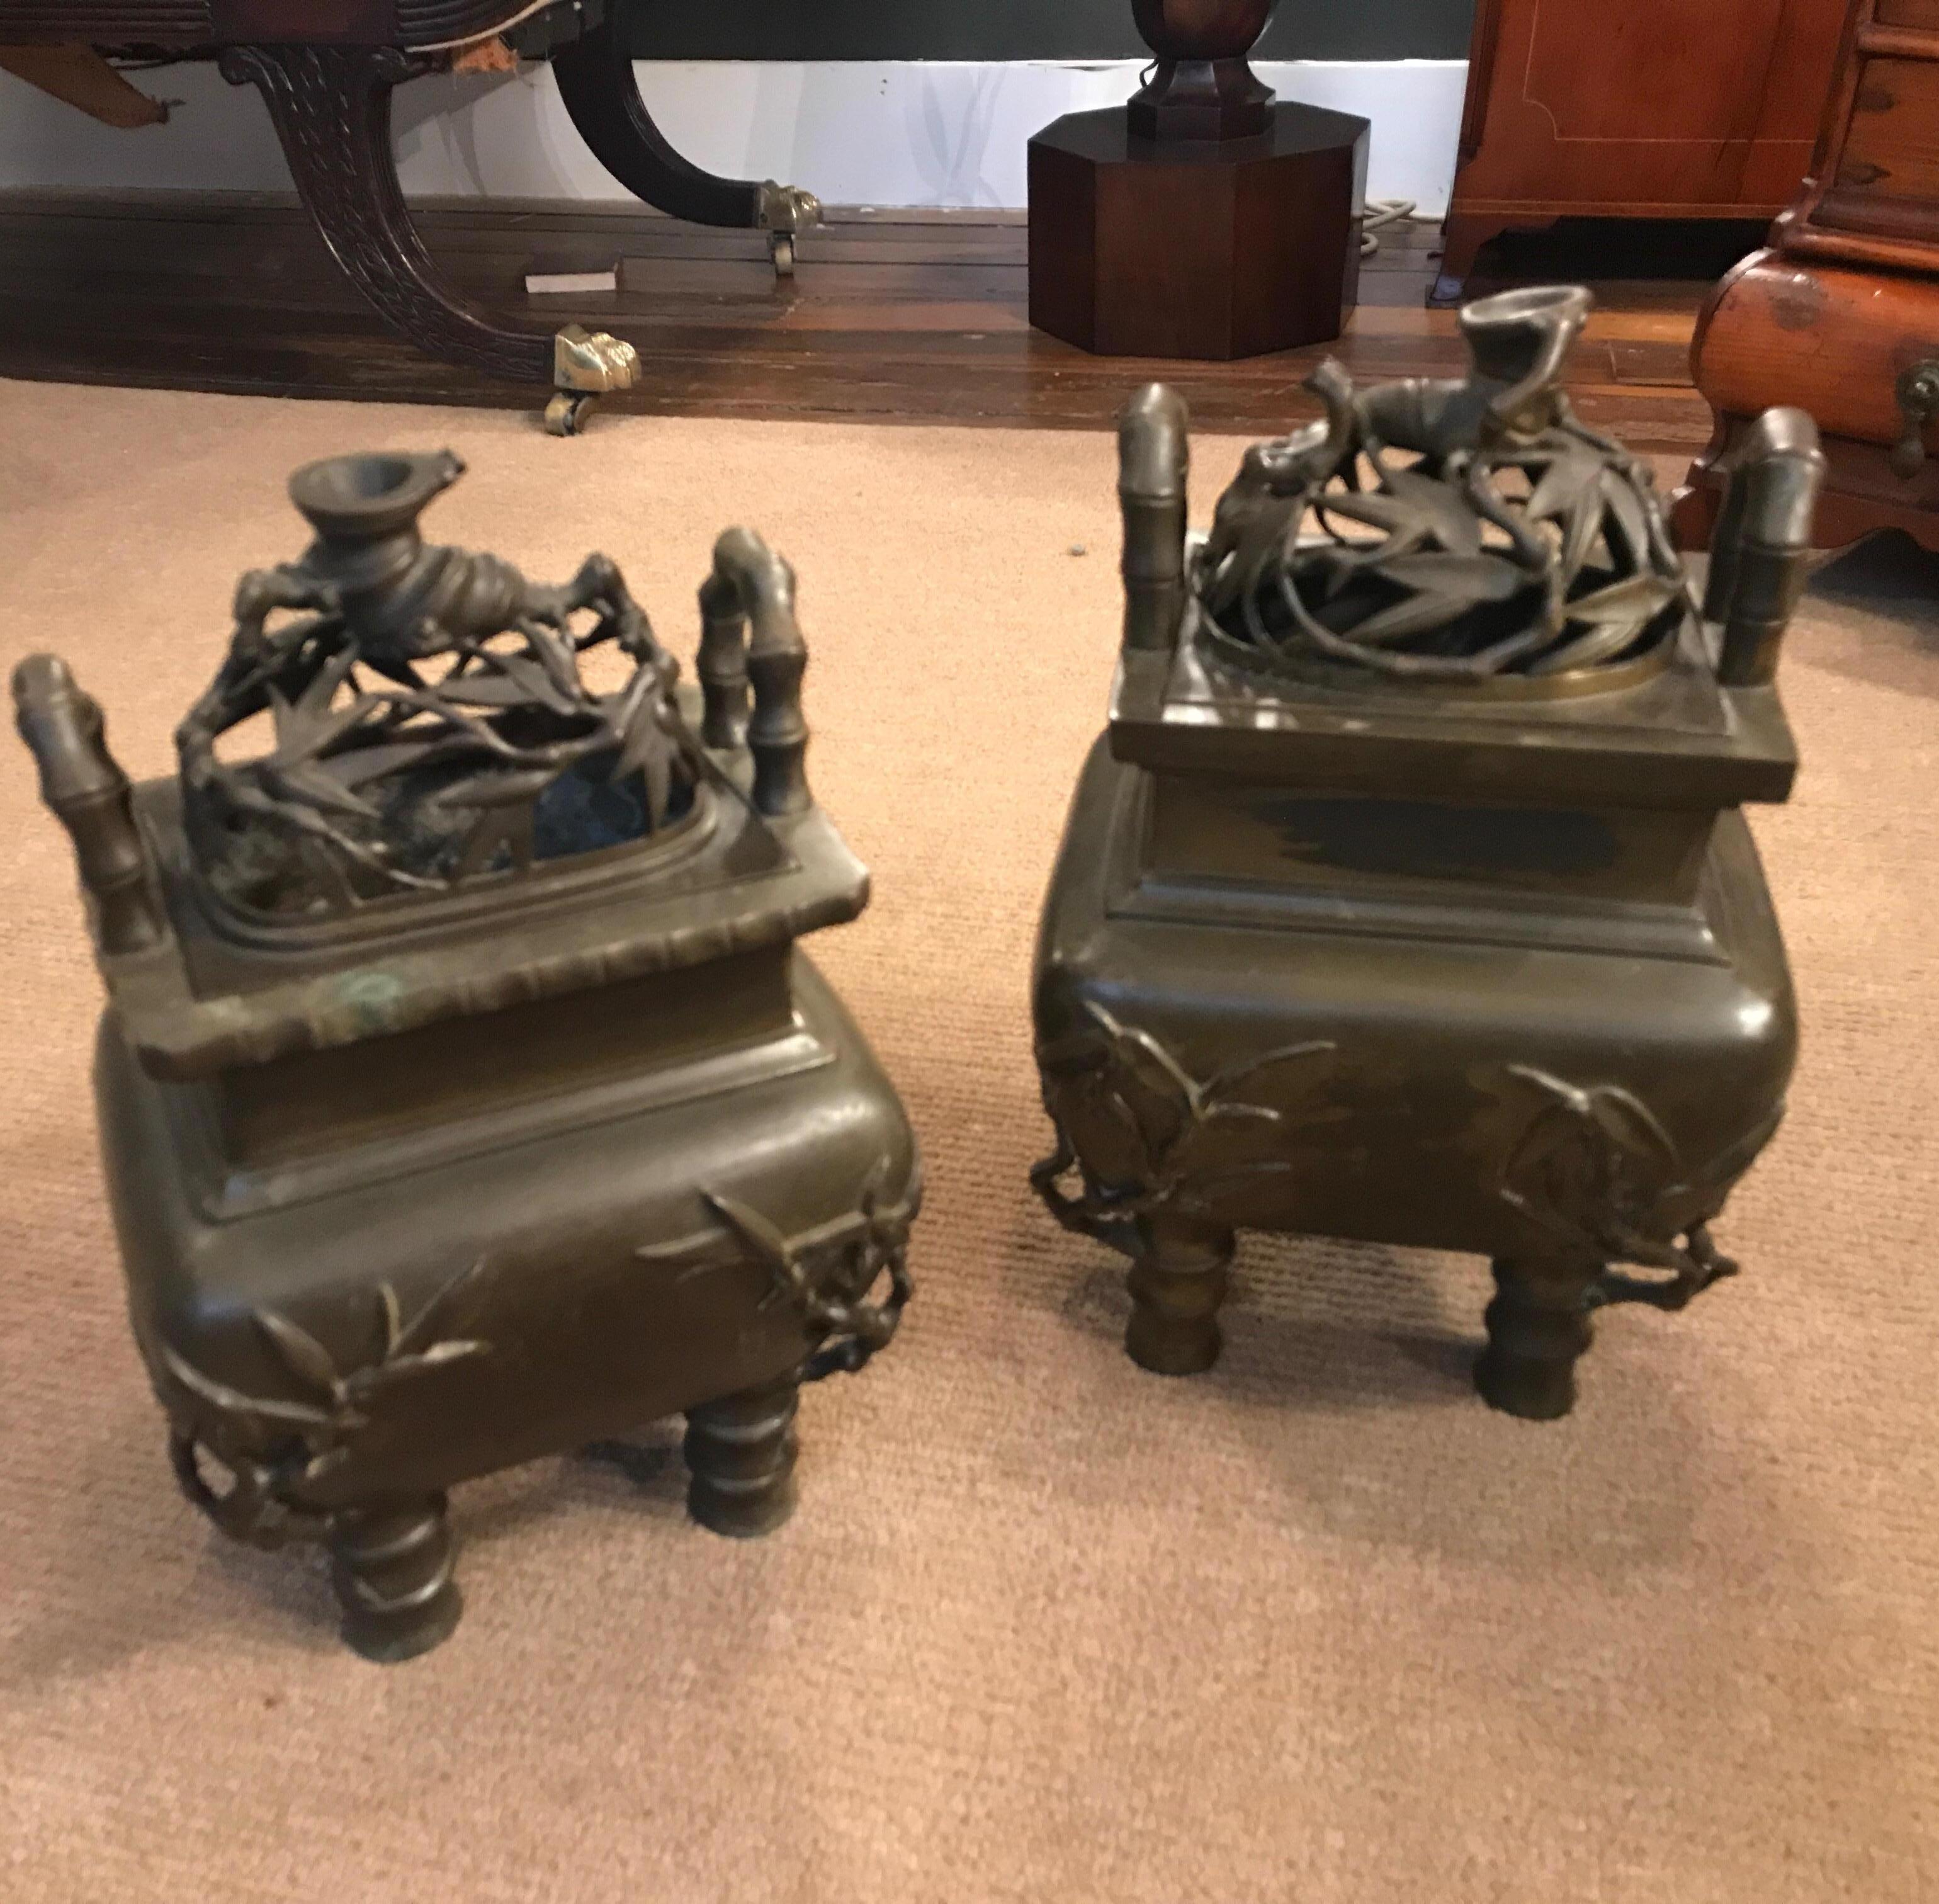 This pair is a near pair with slight differences along the upper edge the pierced tops with bamboo leaf pattern with handles on each side with a square bulbous body resting on four feet. Mid-19th century with original slightly worn patination.